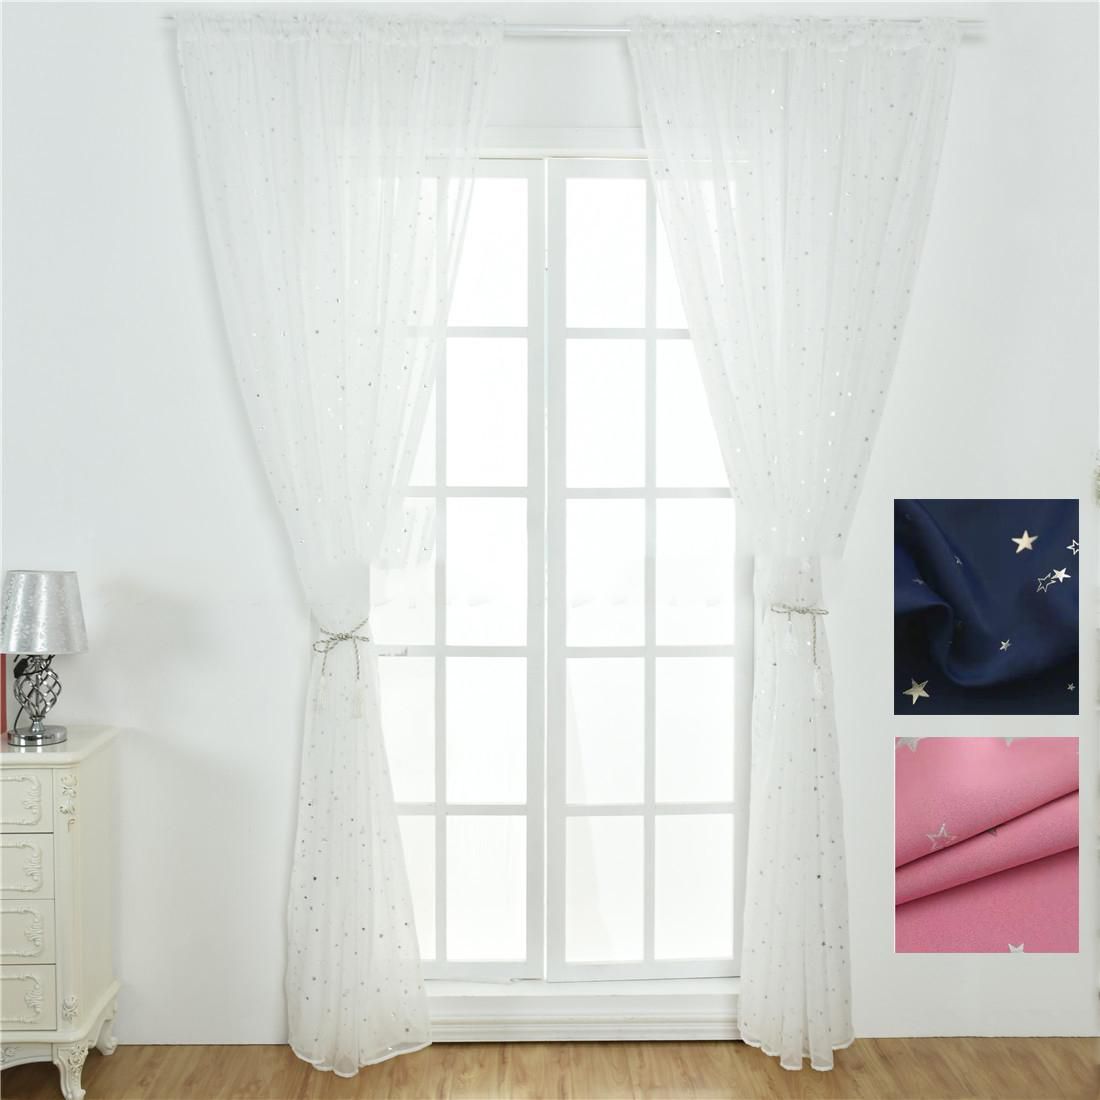 1pcs Star Printed Window Curtain Home Decor - 2 Sizes (3 Colors)